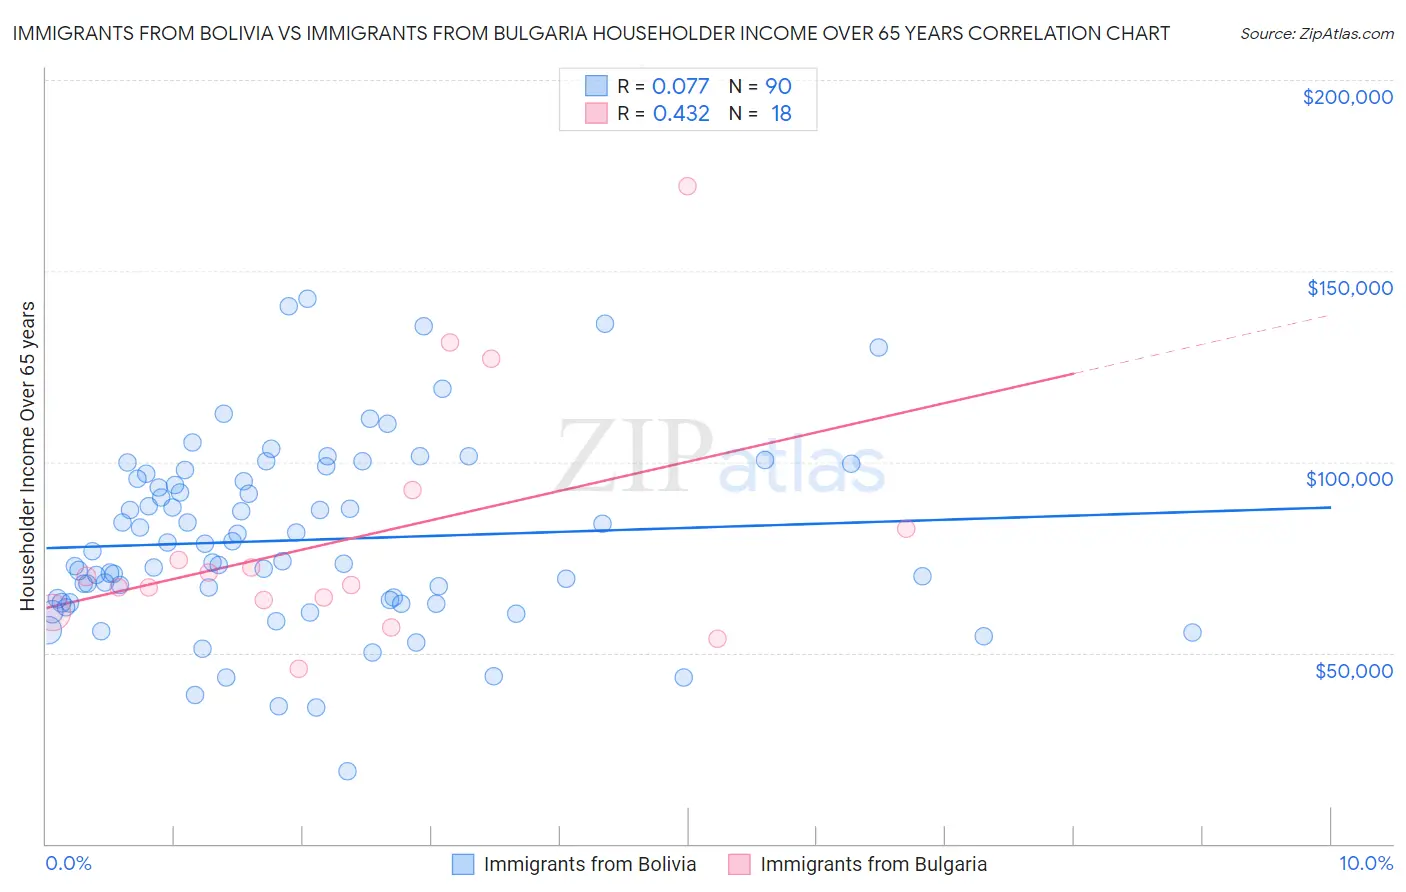 Immigrants from Bolivia vs Immigrants from Bulgaria Householder Income Over 65 years